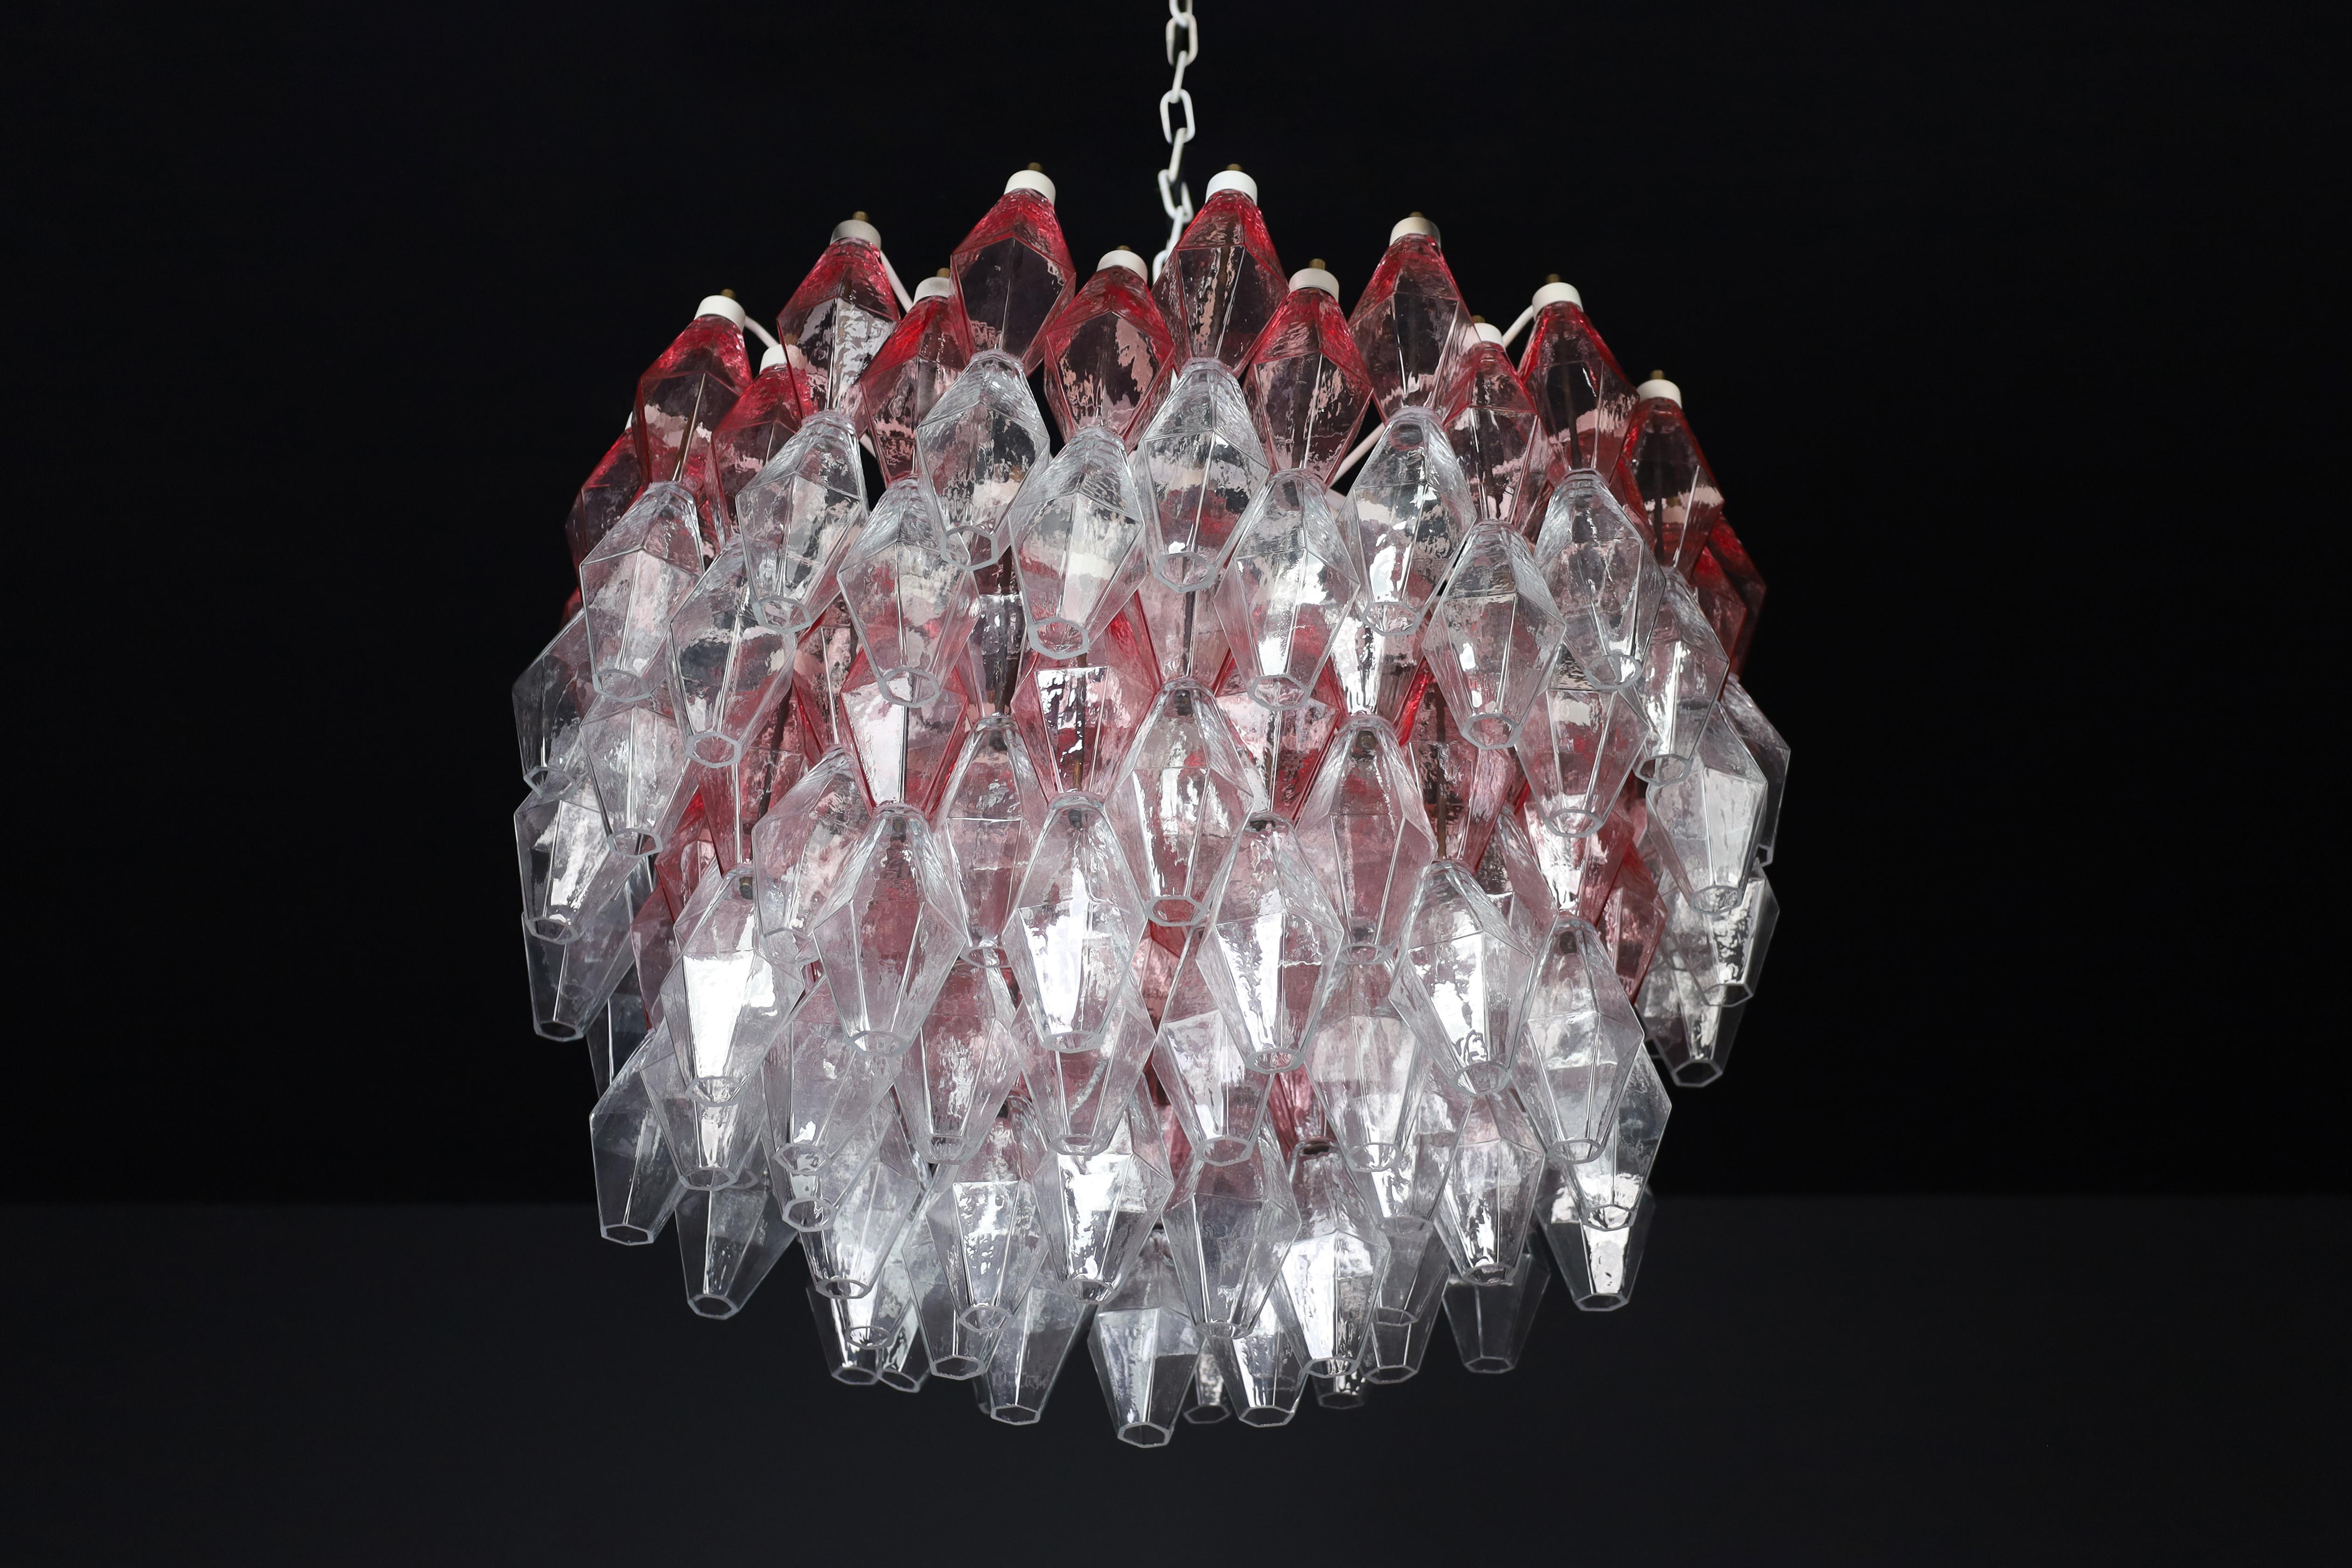 Pink and Clear polyhedral-shaped Murano glass Grand Chandelier By Carlo Scarpa, Italy, 1960s

This chandelier model is called 